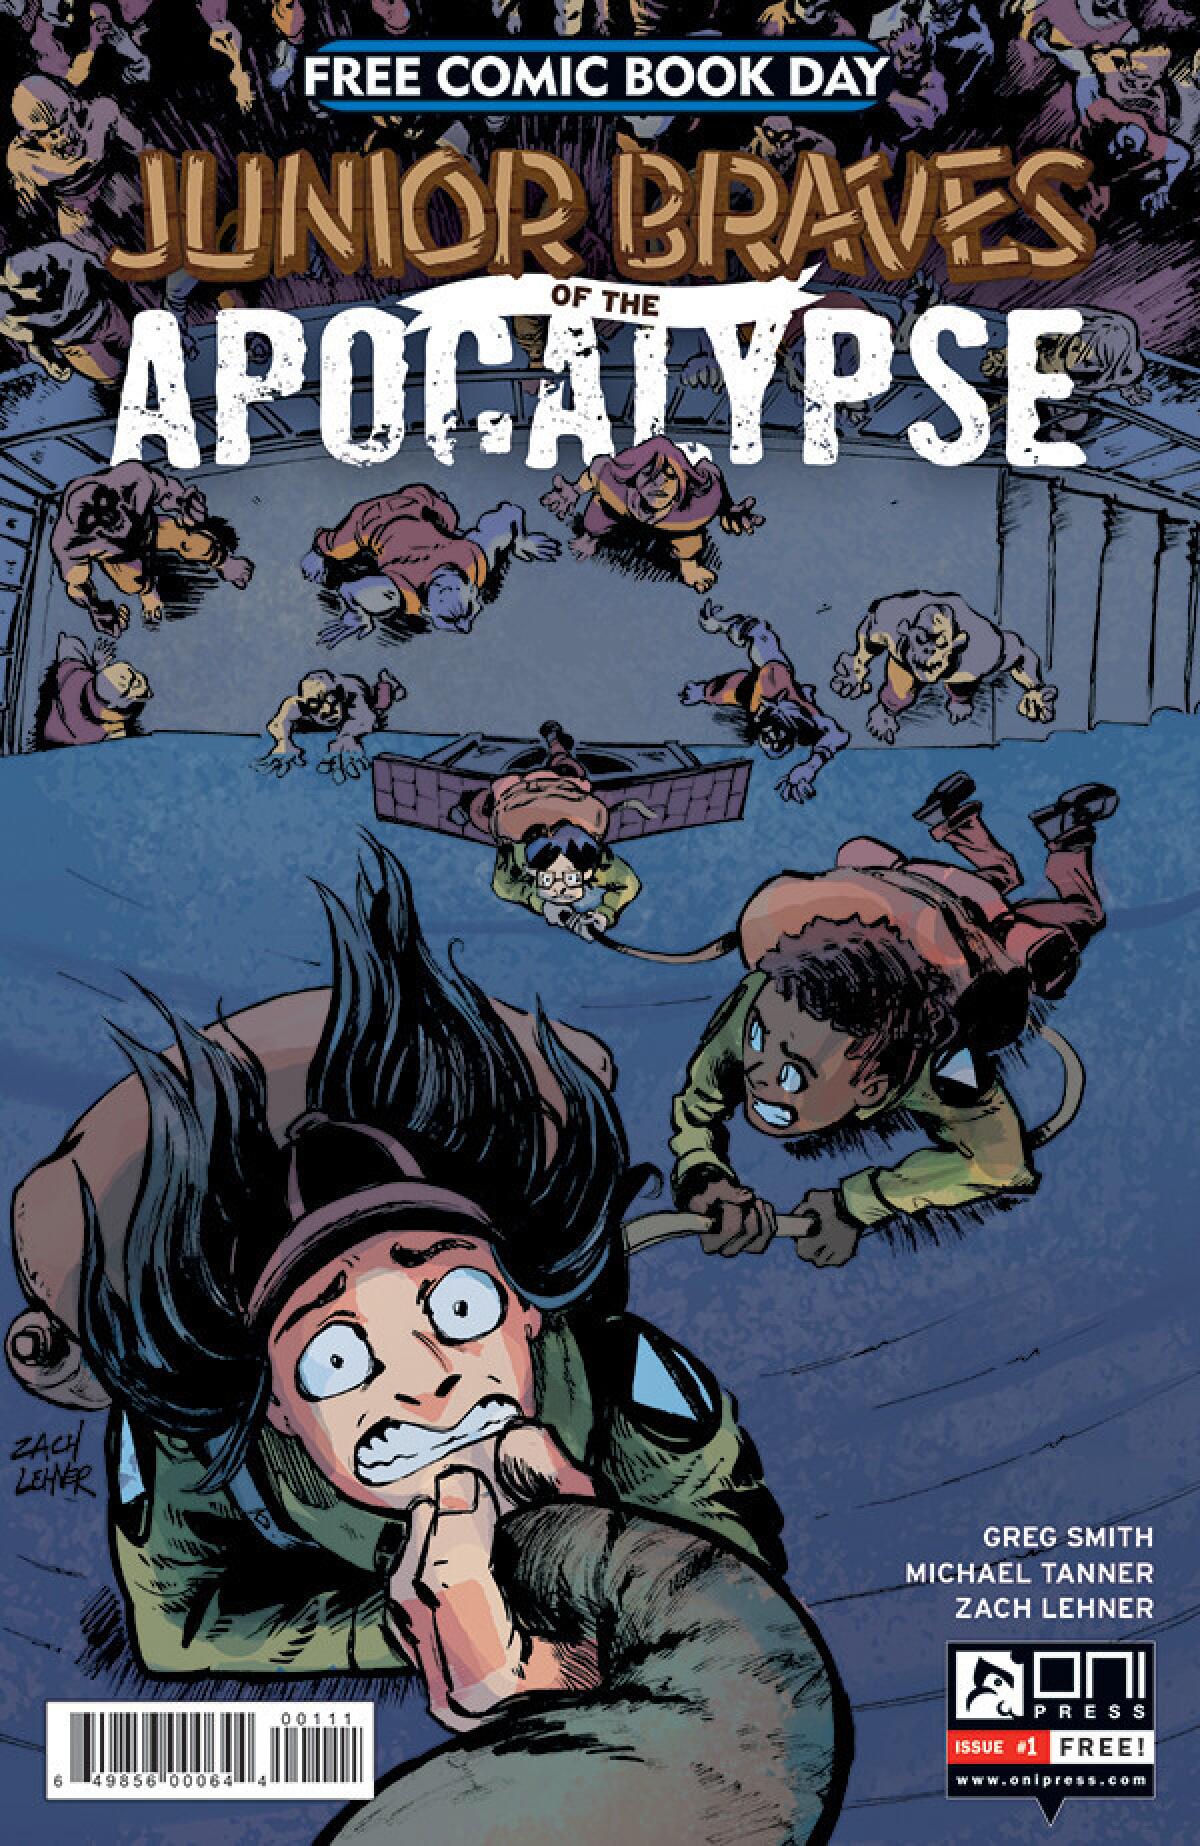 "Junior Braves of the Apocalypse" by Greg Smith, Michael Tanner and Zach Lehner. (Oni Press)